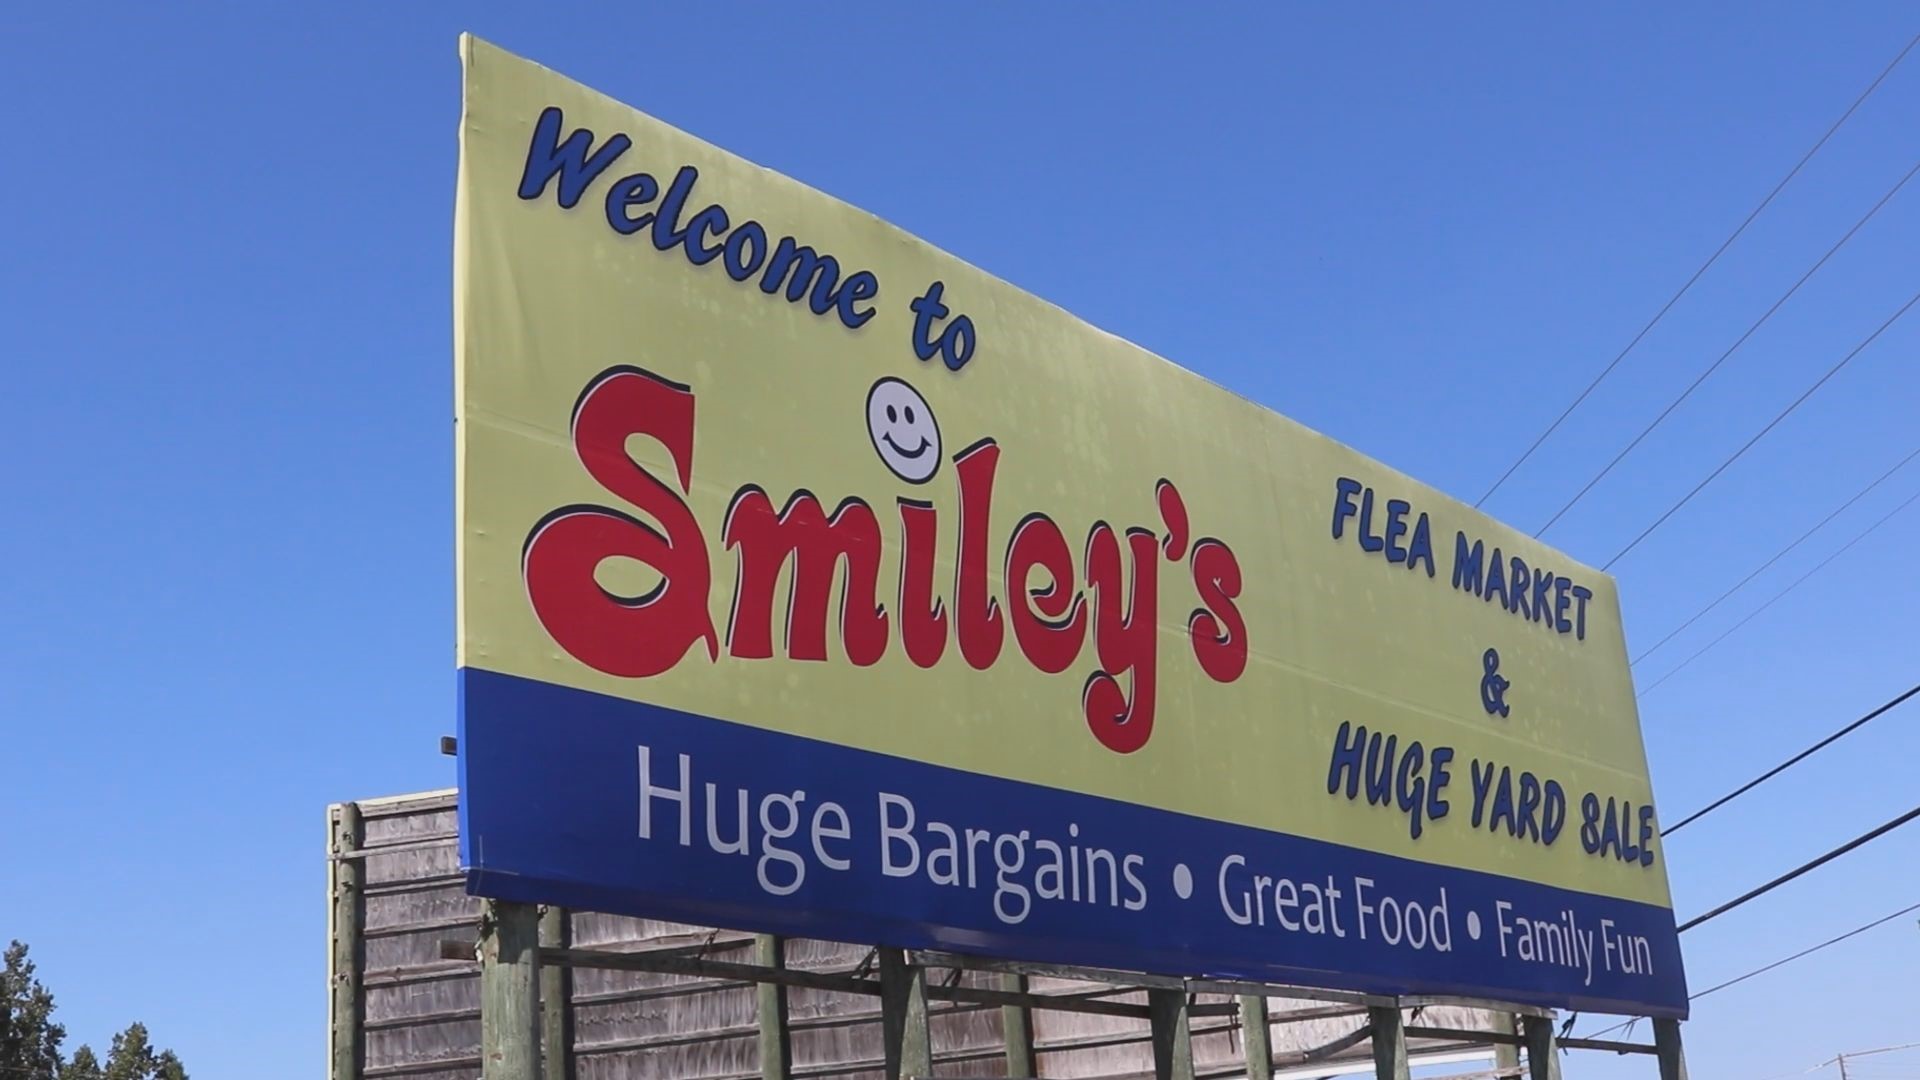 Smiley’s started out with one location, but the company now operates in Florida, Georgia and North Carolina.